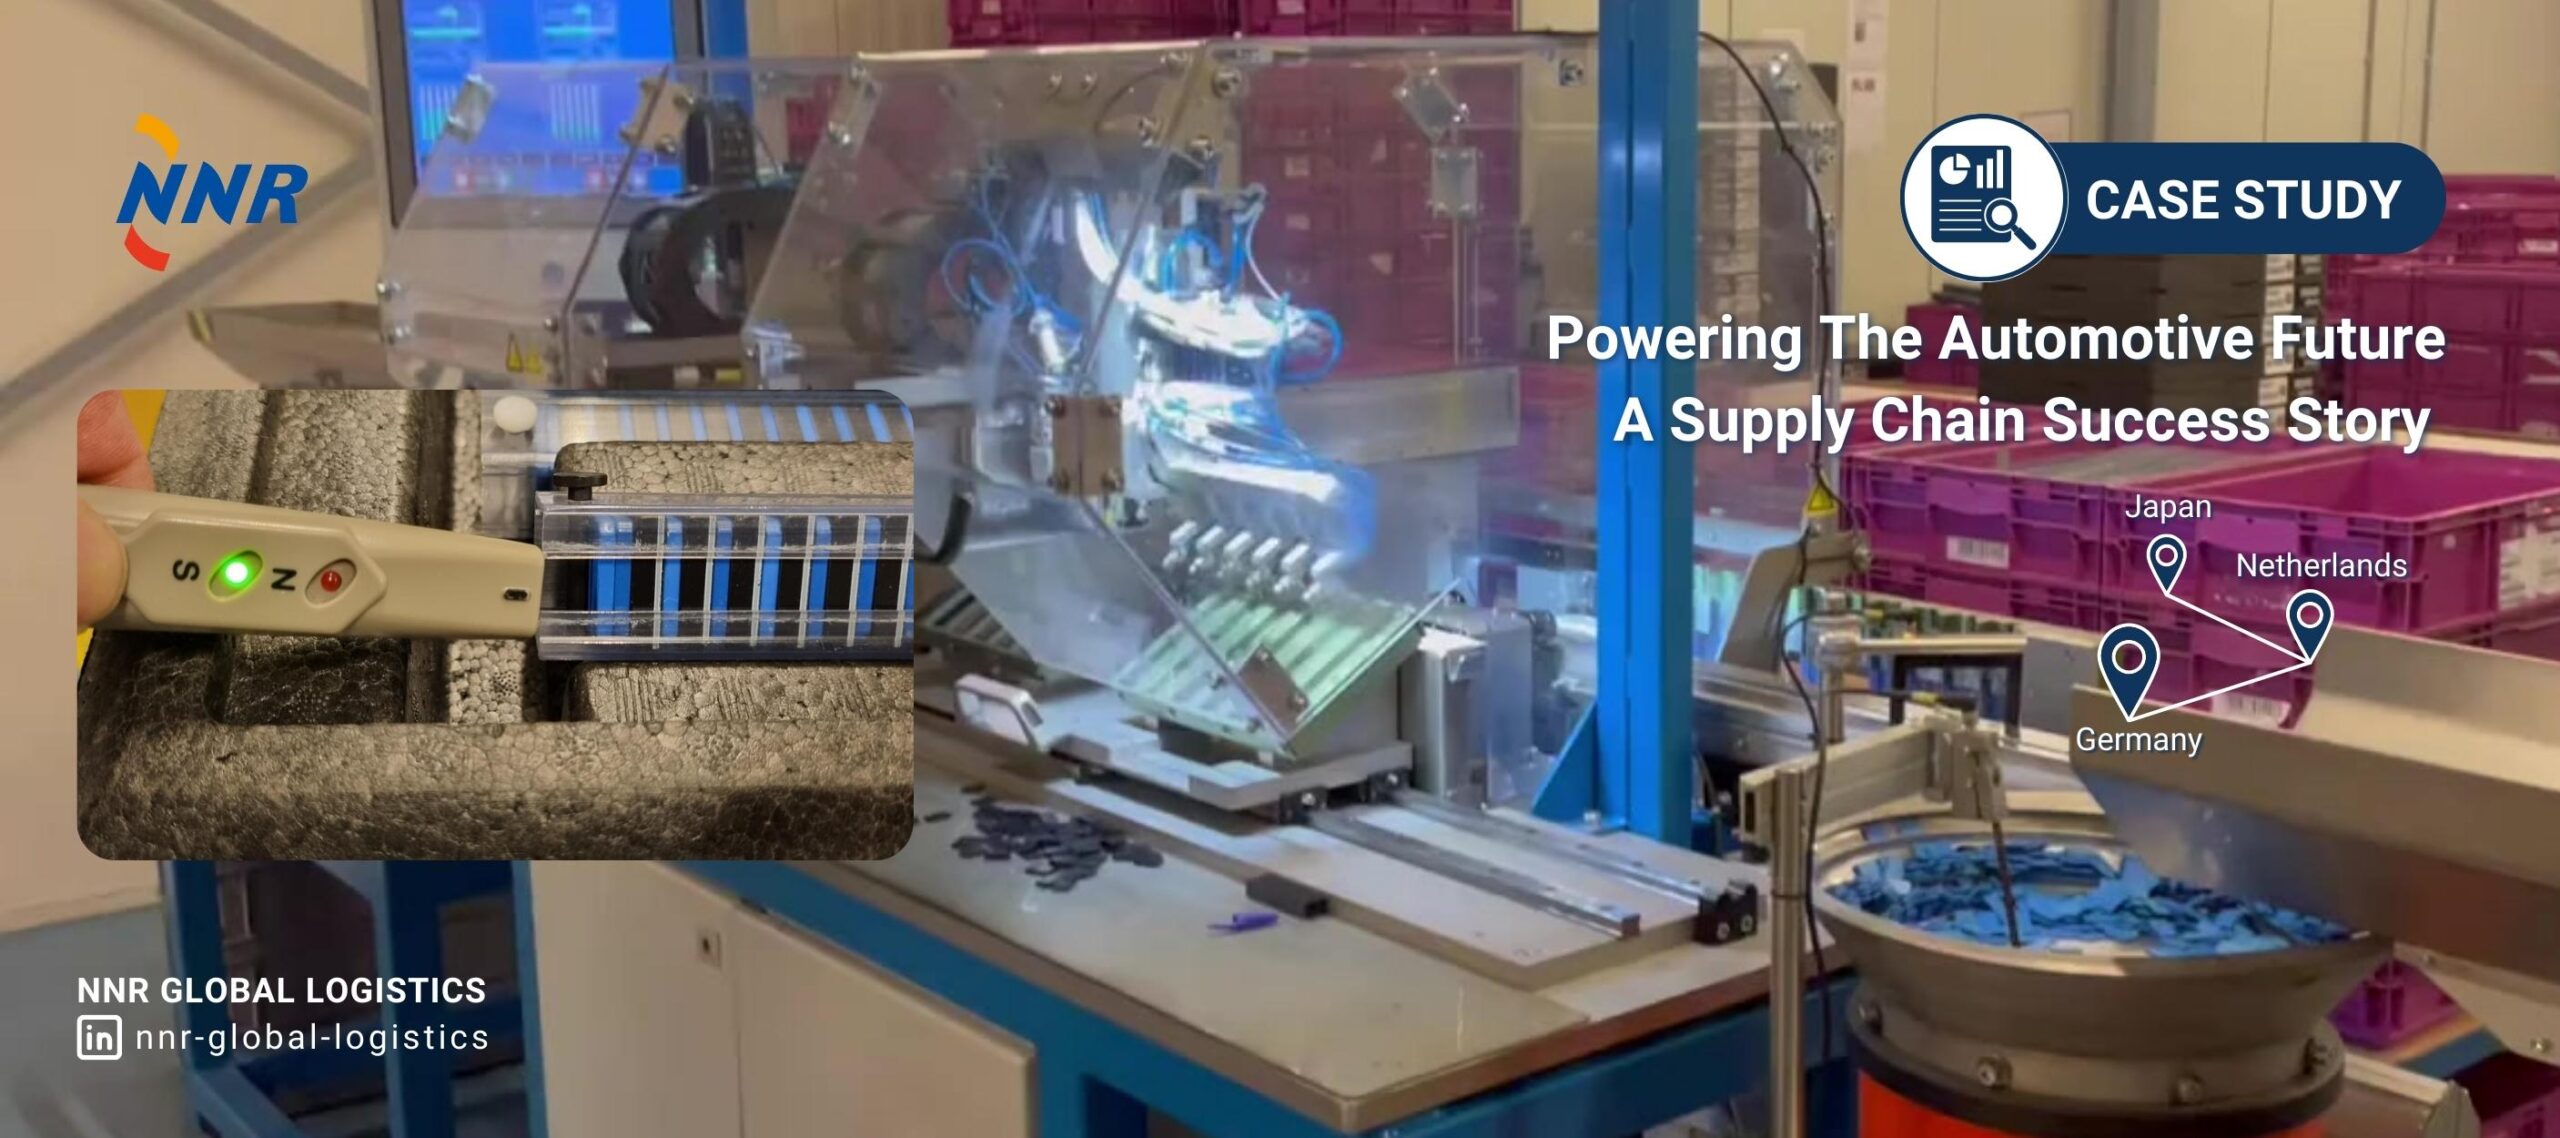 Powering The Automotive Future: A Supply Chain Success Story